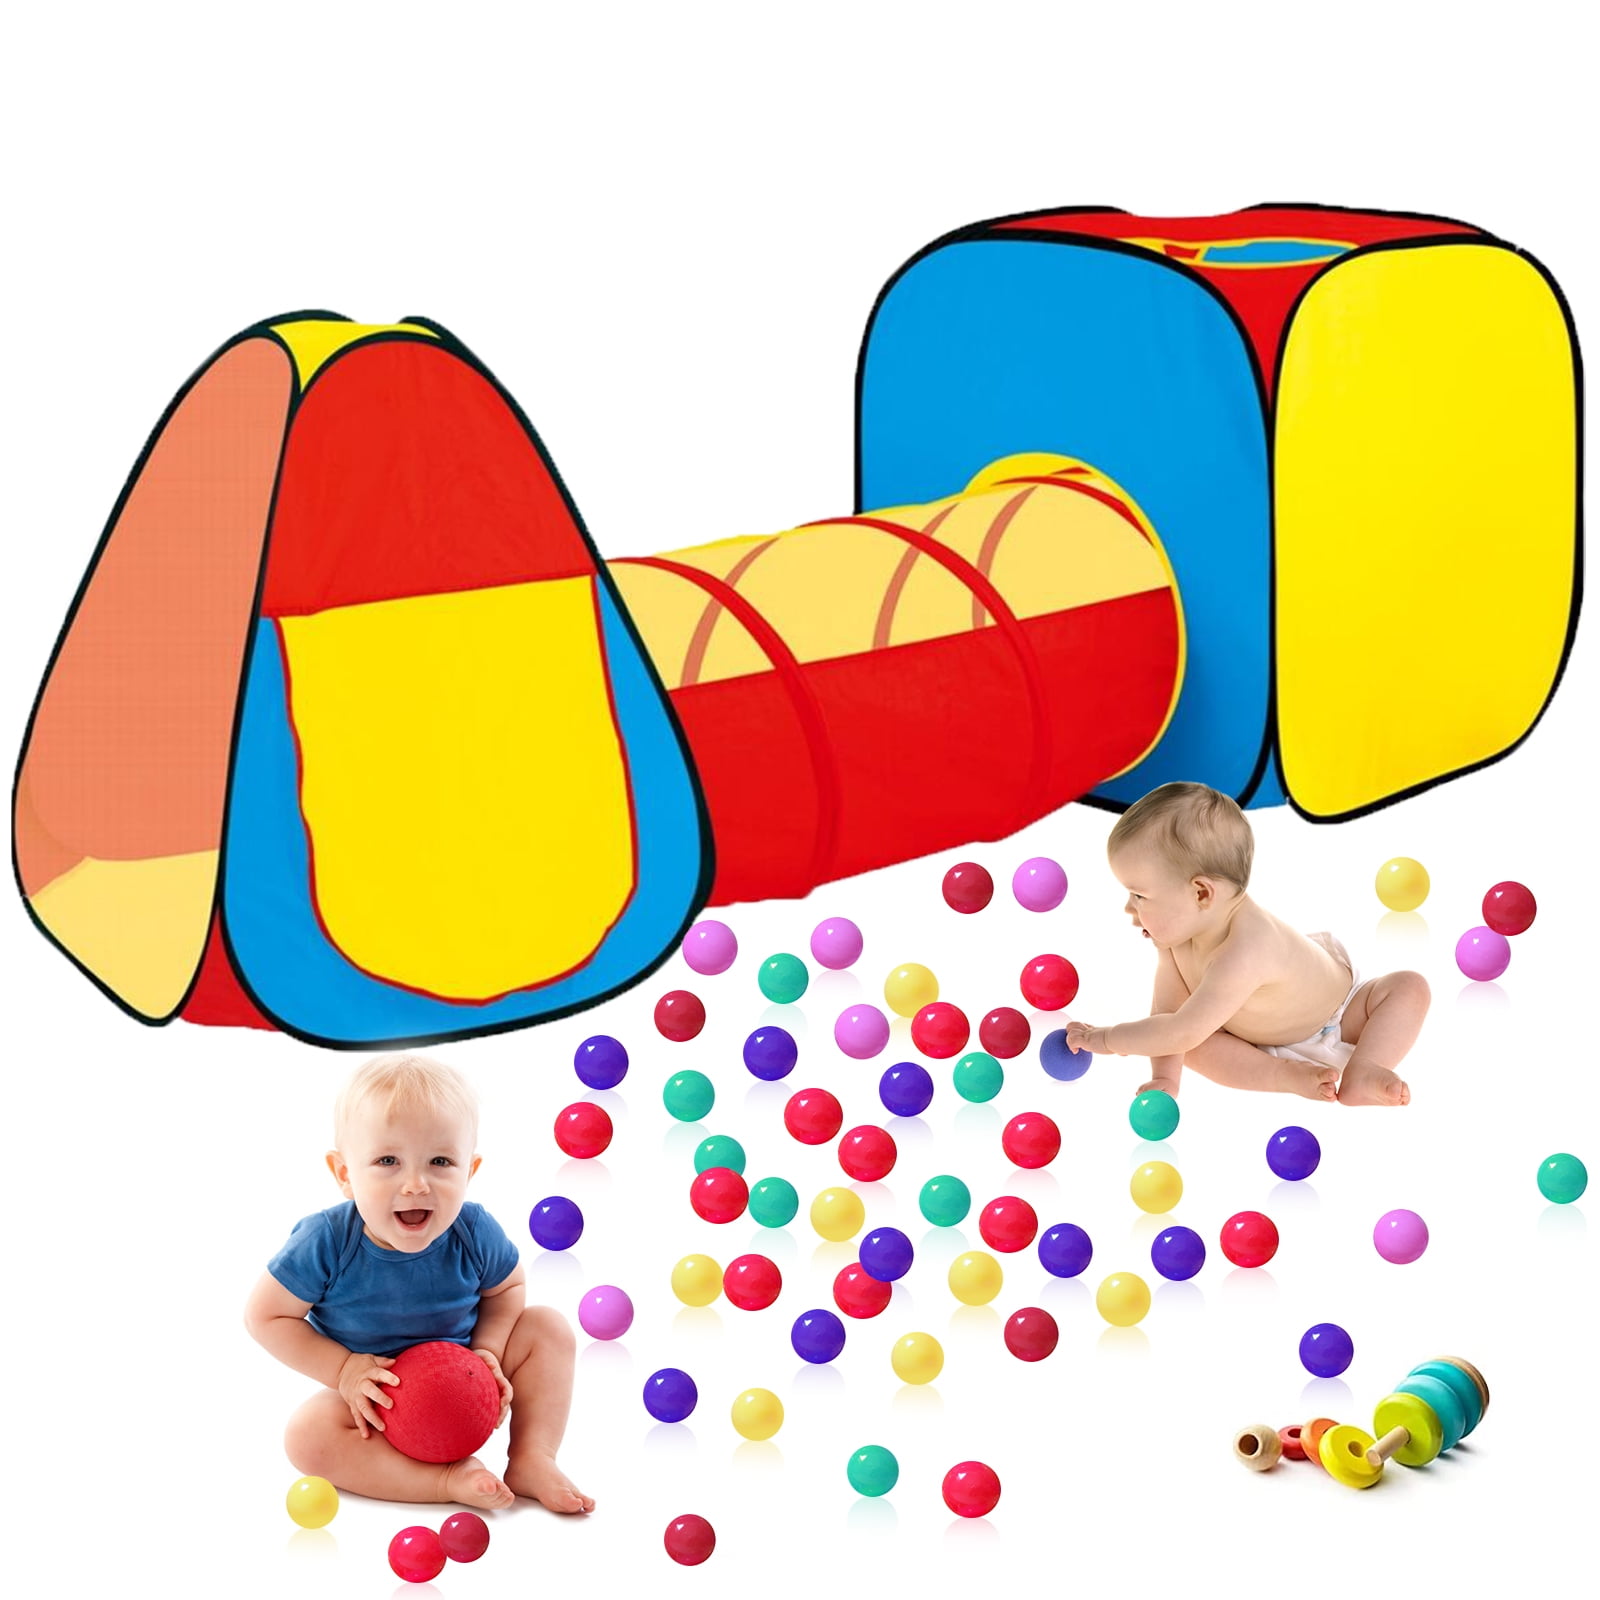 UTEX 3 in 1 Pop up Play Tent with Tunnel Ball Pit for Kids for sale online 